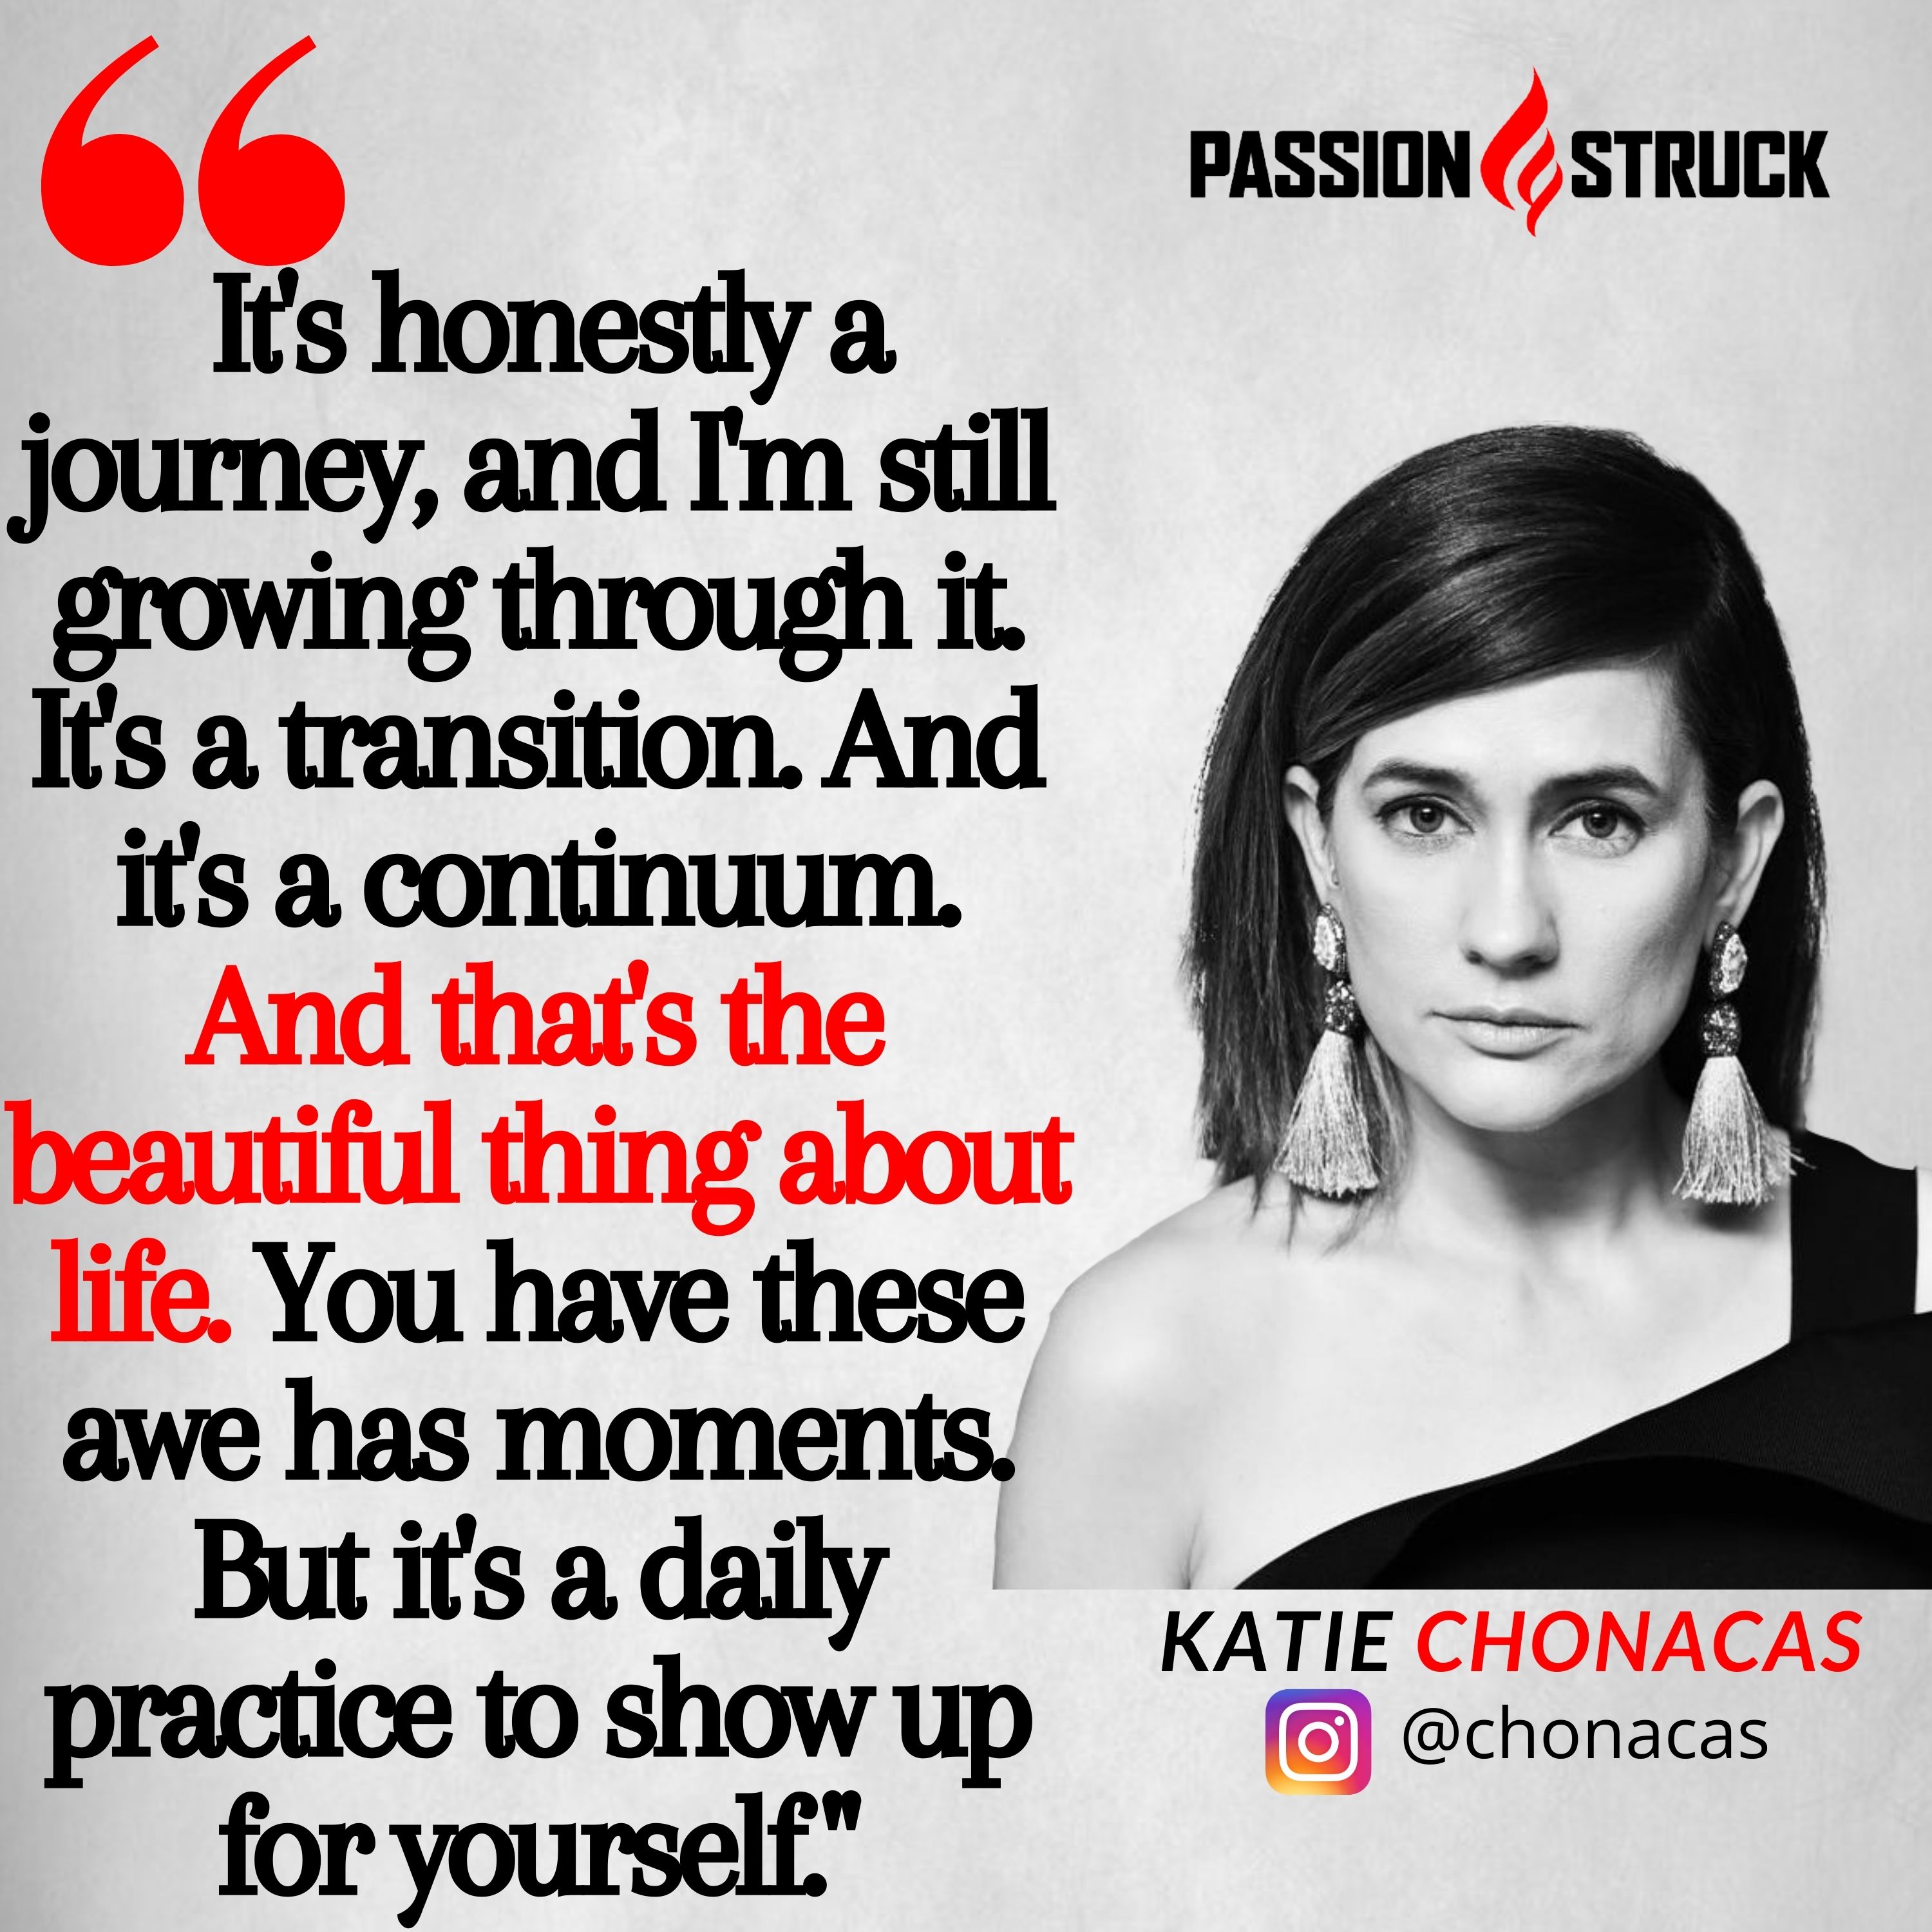 Katie Chonacas quote on how life is a journey of showing up from the passion struck podcast